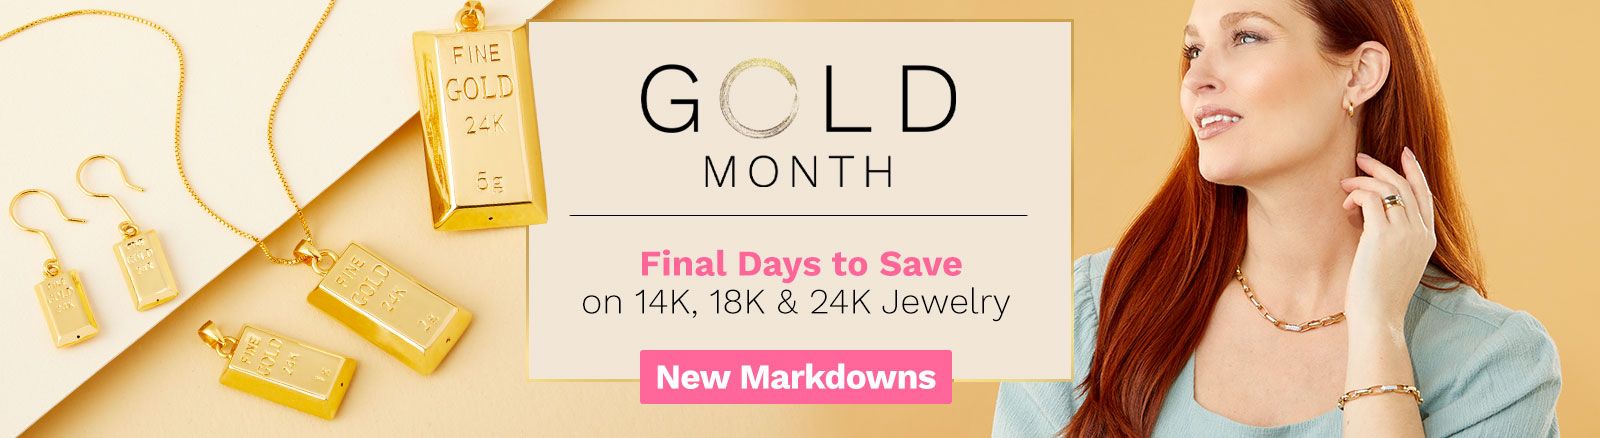 Gold Month Celebrate All Month Long with Incredible Savings on 14K, 18K & 24K Jewelry  ft.211-447, 211-444, 211-436, 203-711